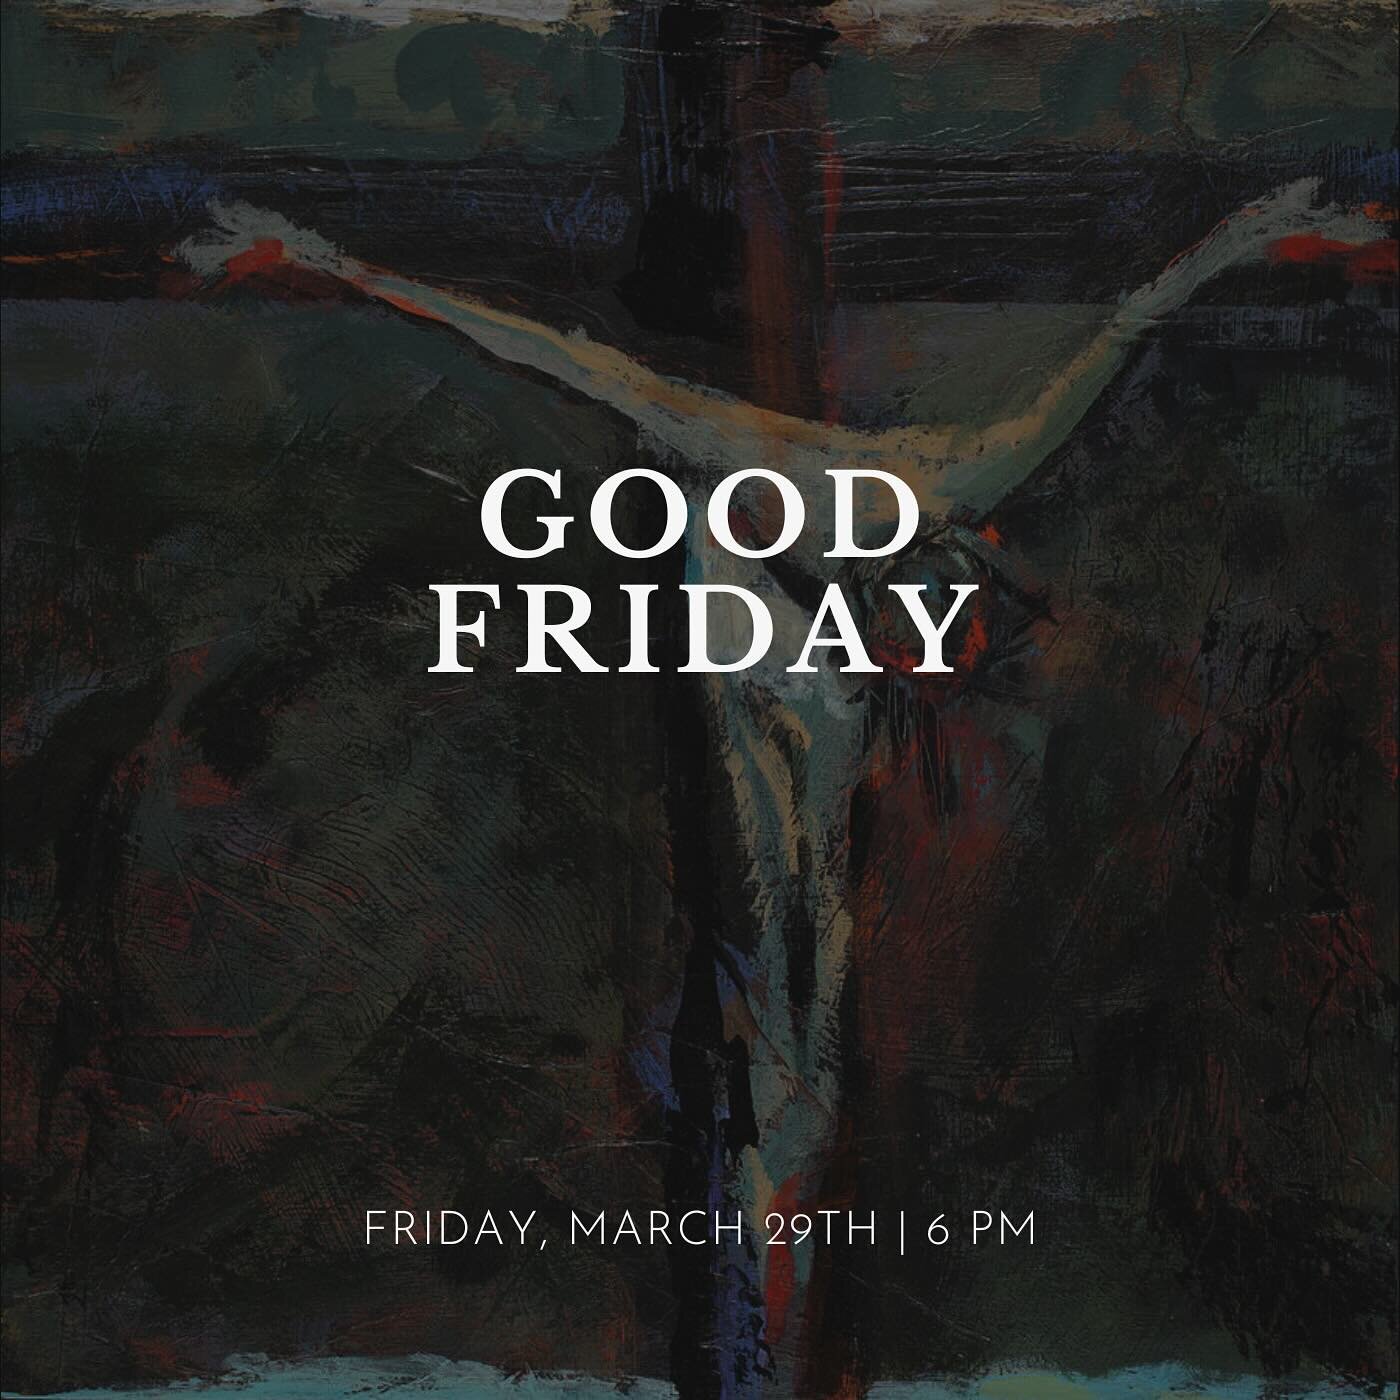 Good Friday is traditionally a&nbsp;day of solemnity and fasting creating space to contemplate the day Jesus was crucified and died. It is perhaps the most somber and austere of days centered upon the Cross of Christ. In the Good Friday service, ther